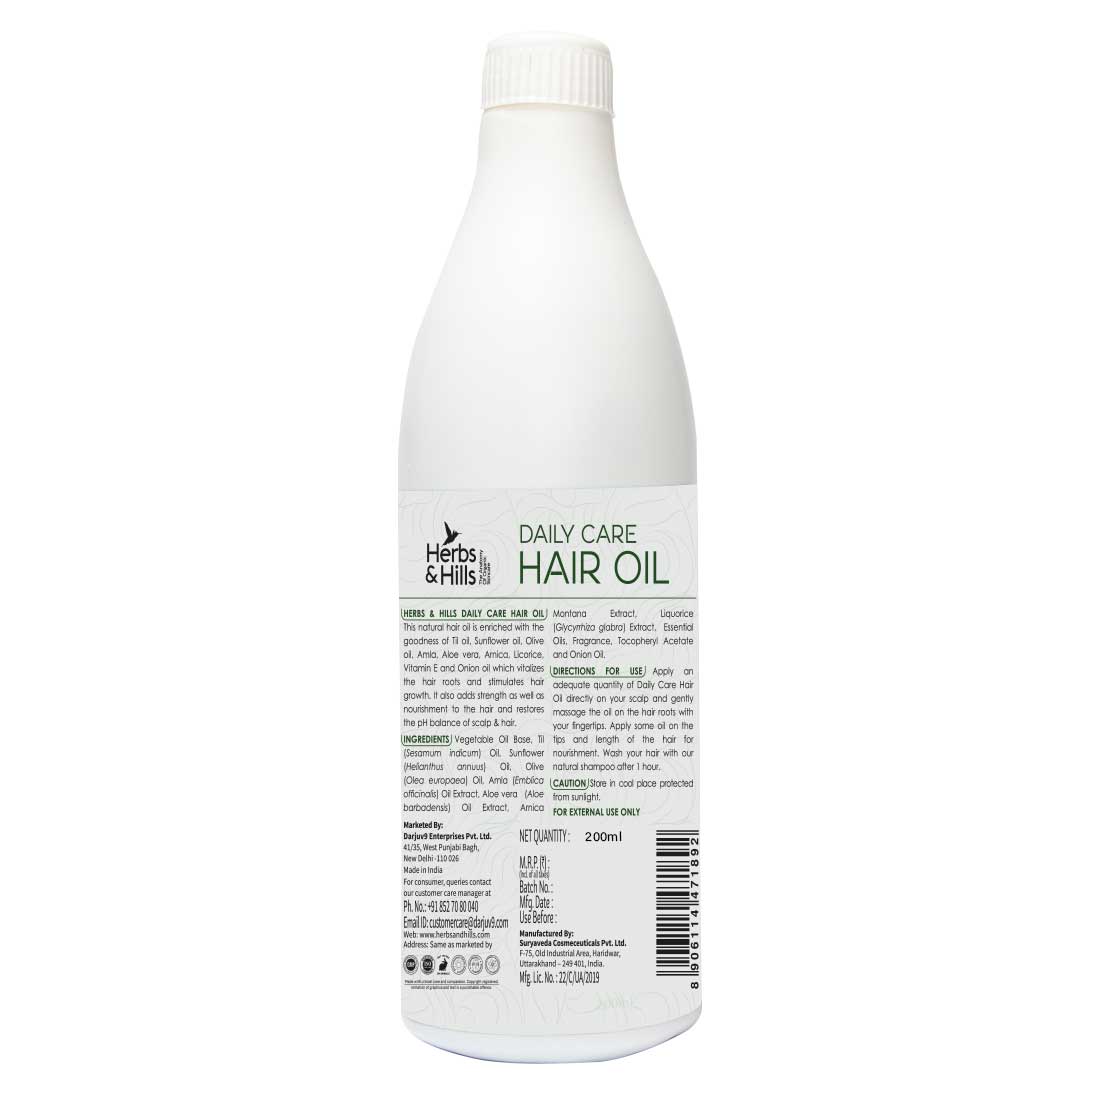 Daily Care Hair Oil available in 200ml, 500ml